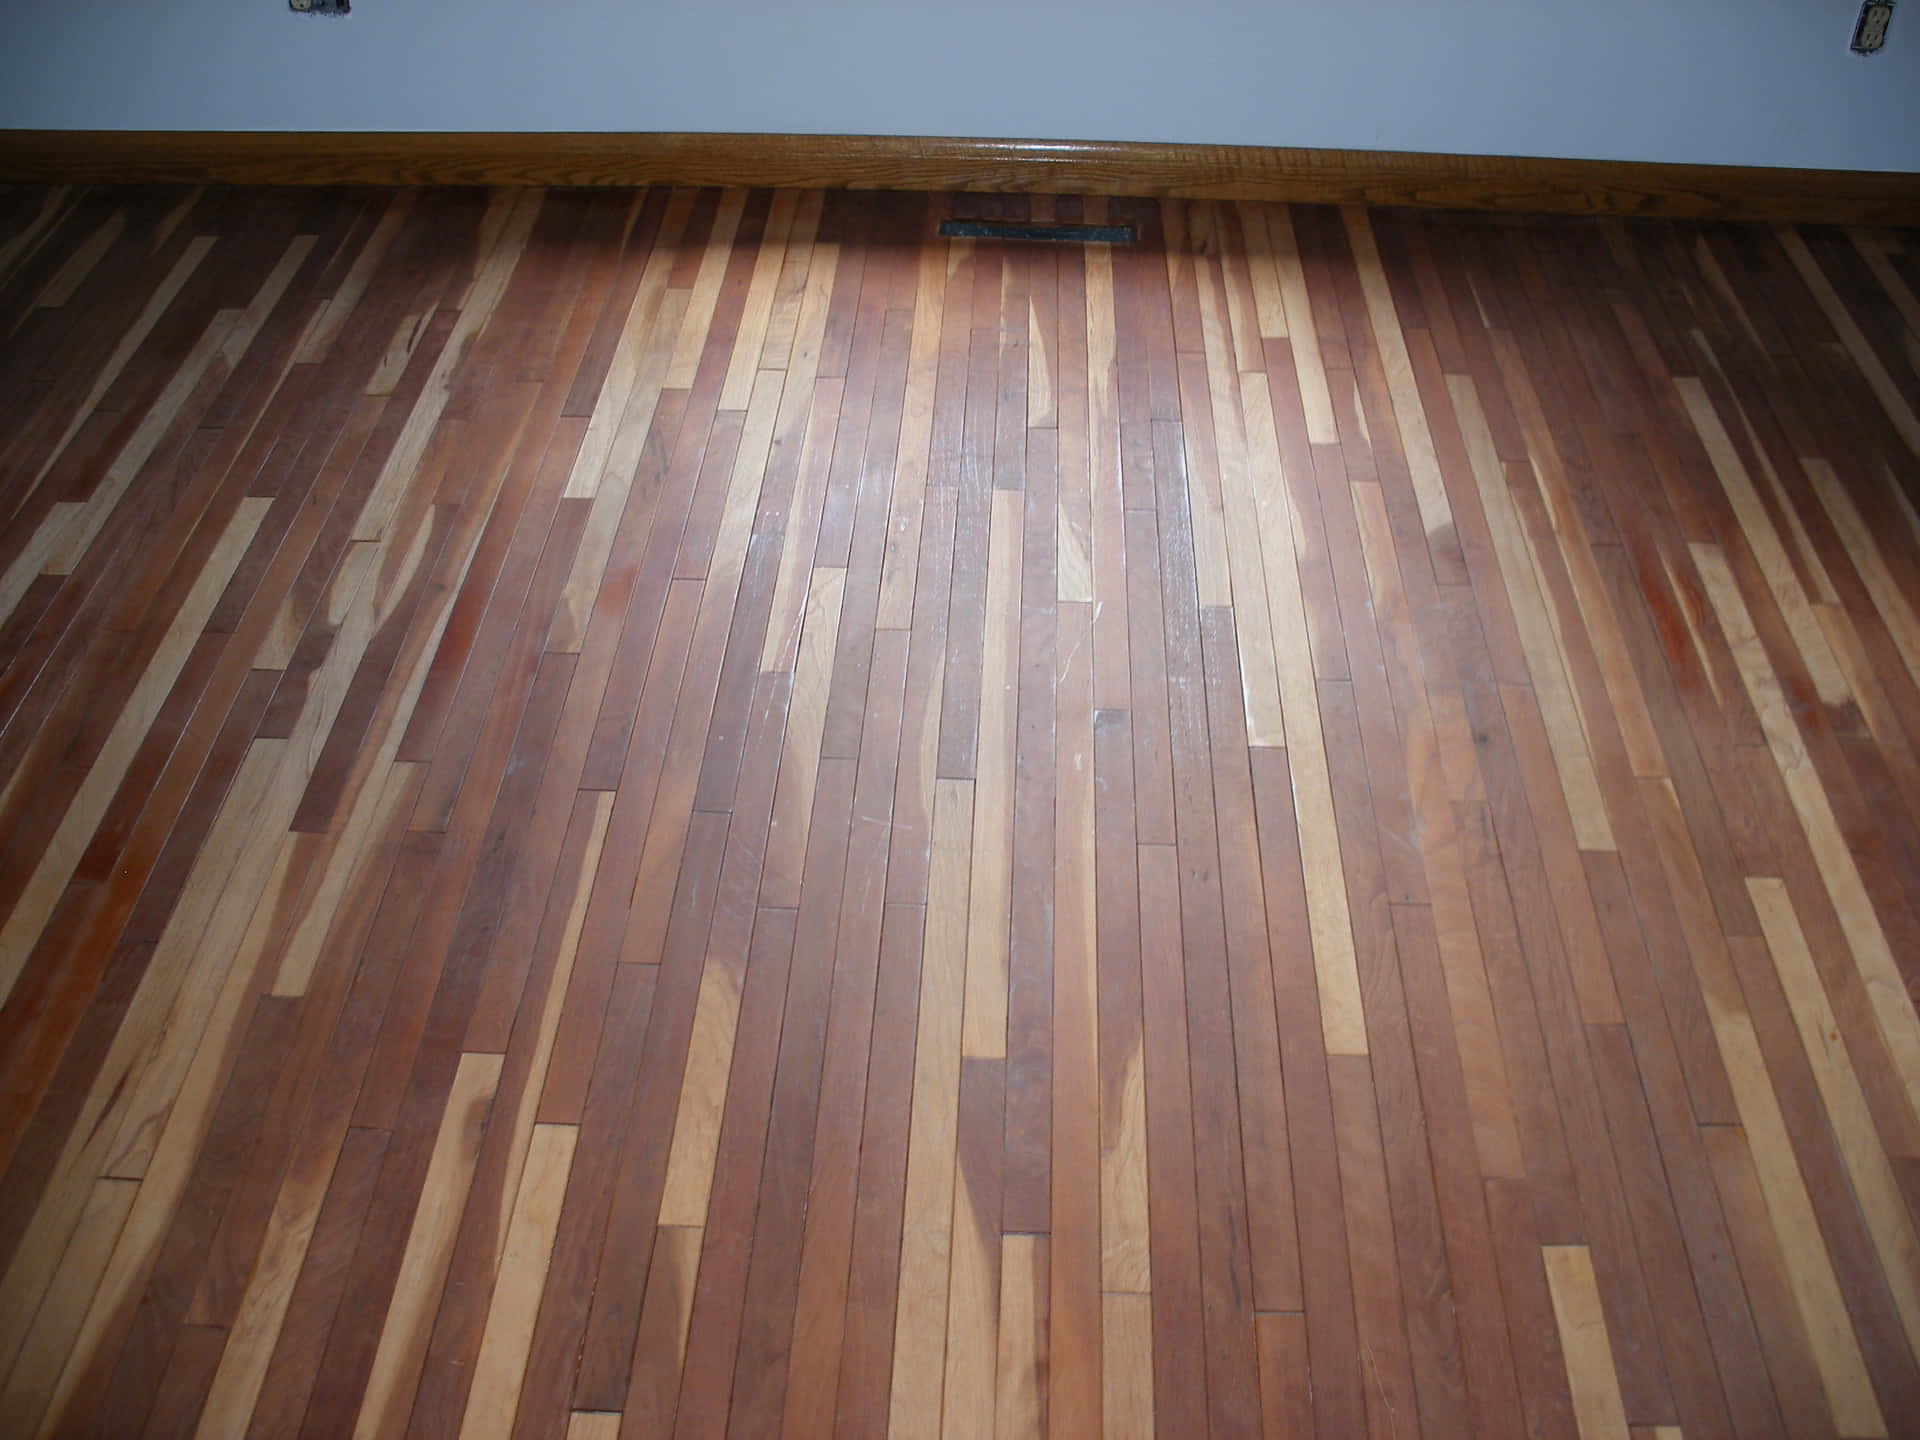 Enjoy the beauty of real wood floors in your home